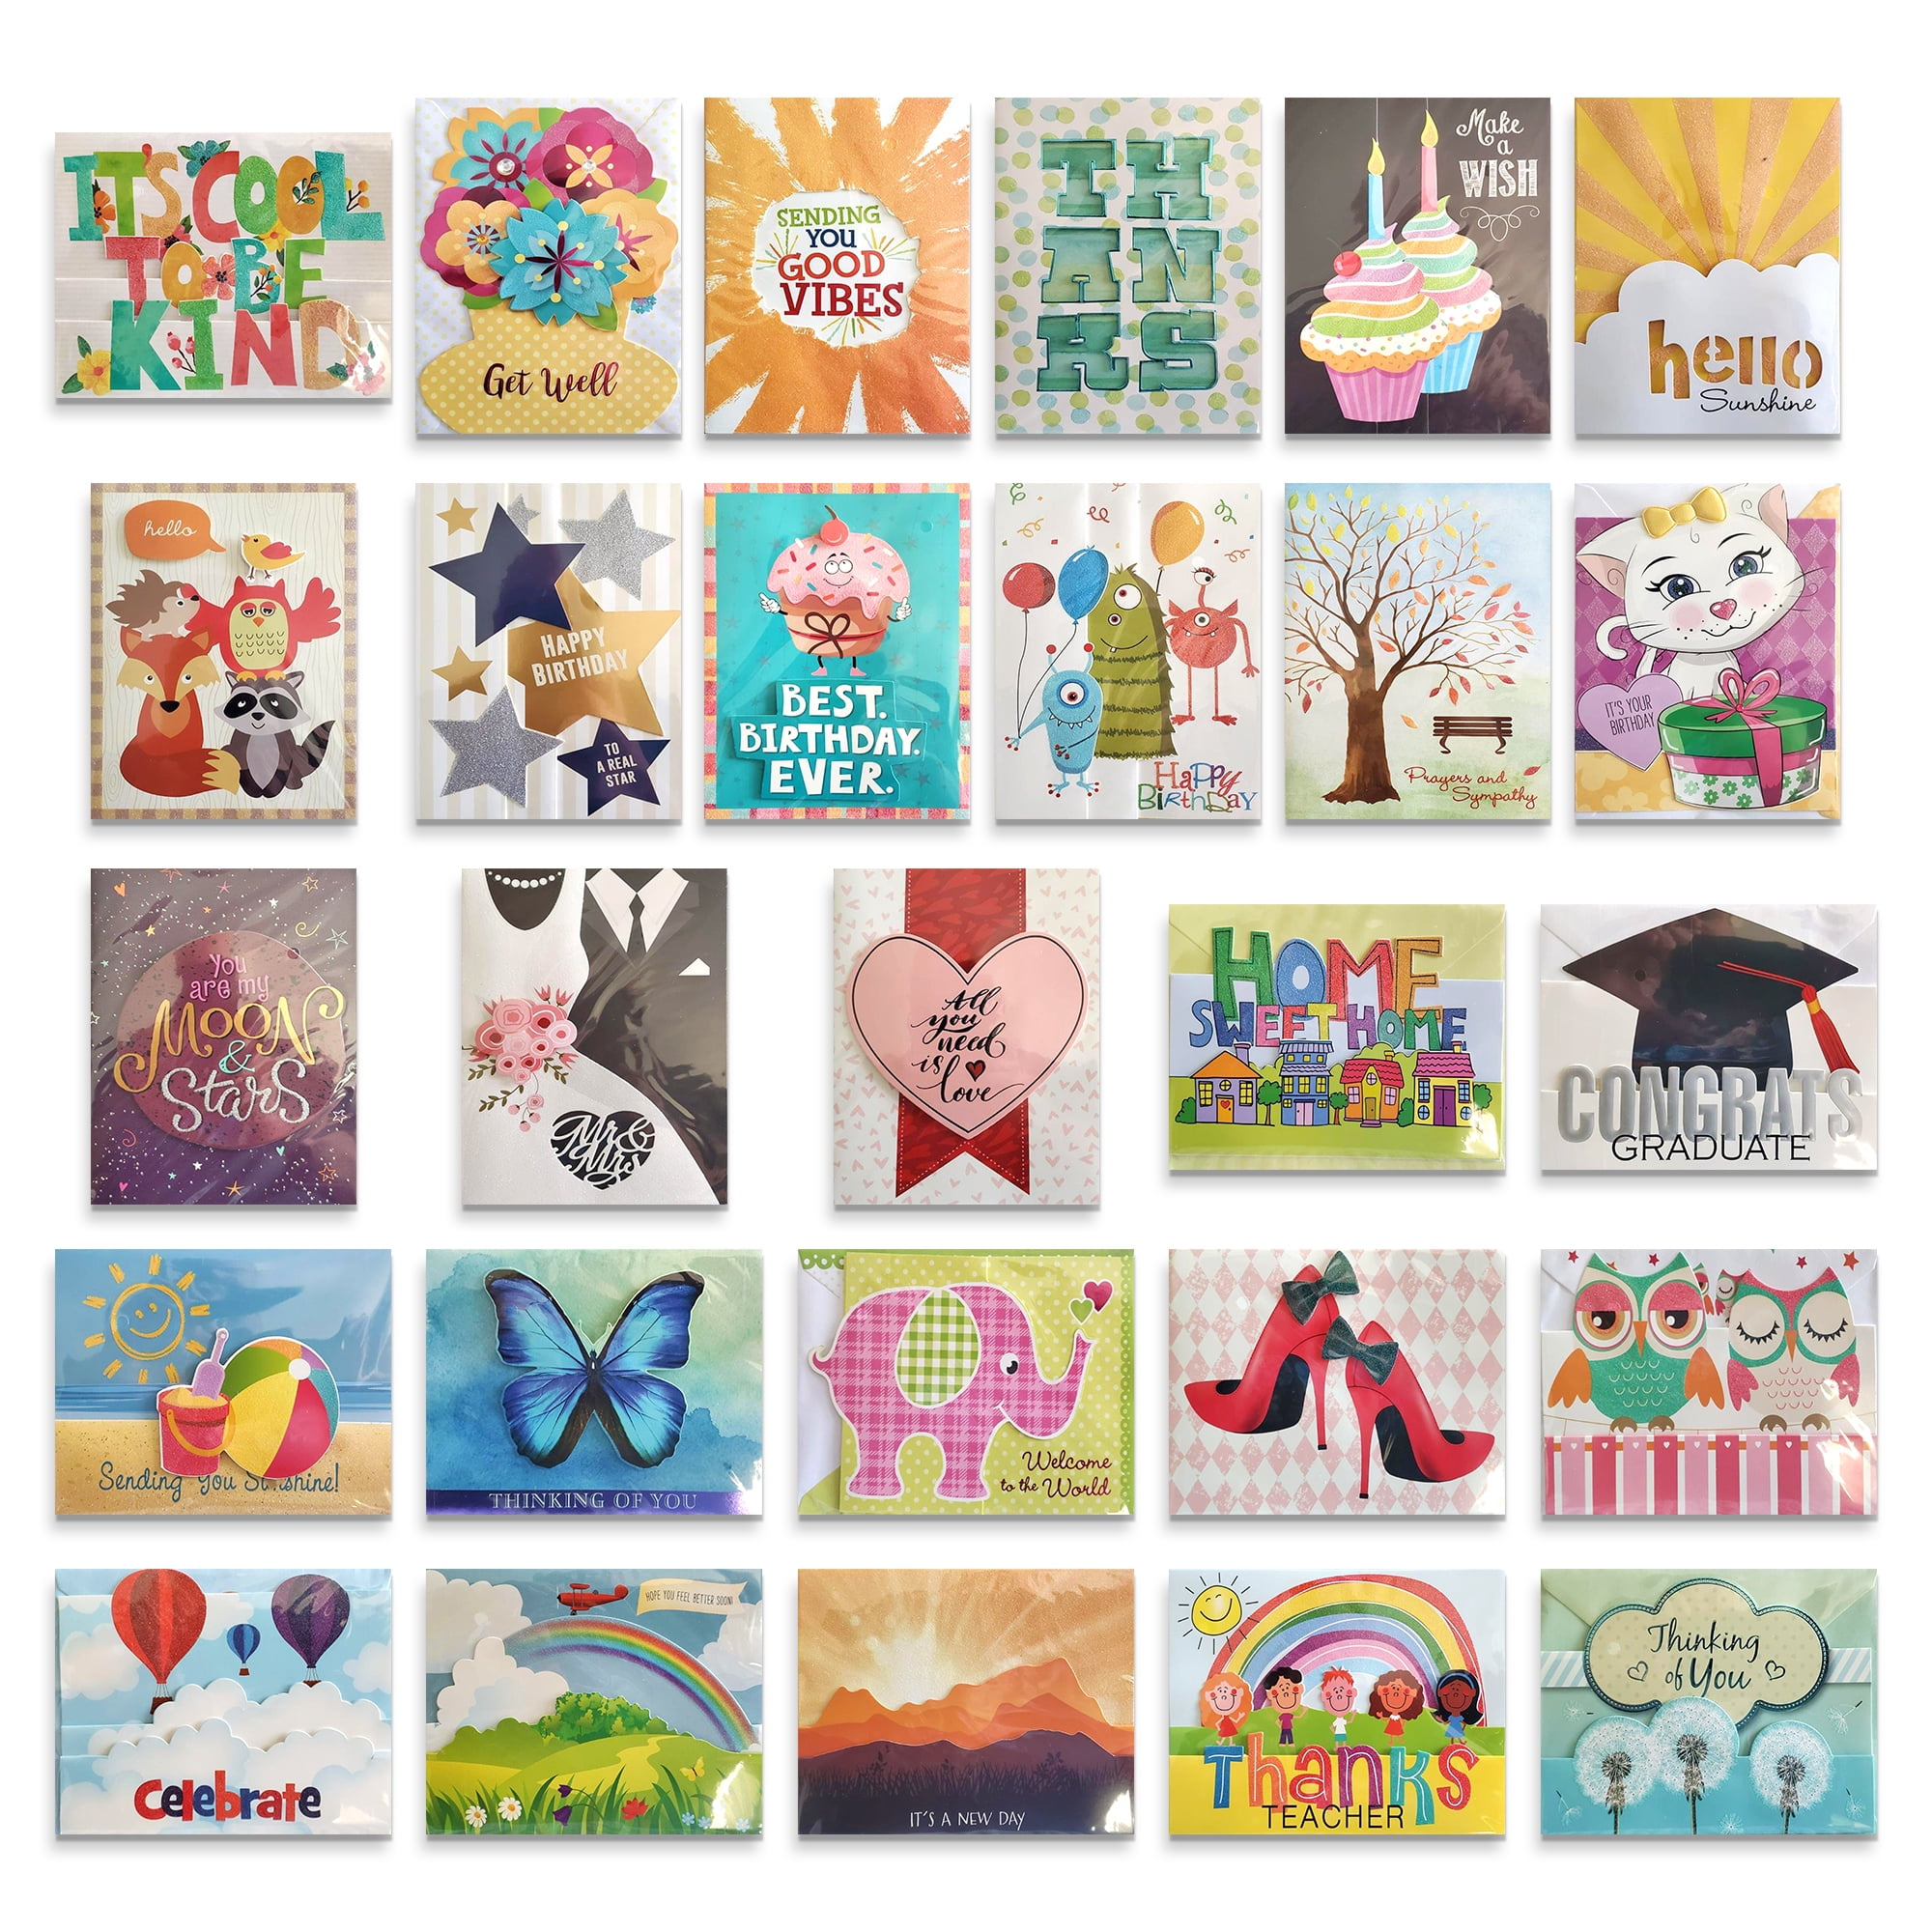 NEW Hallmark Birthday Cards Over 60 Greeting Cards to Choose From & More! 